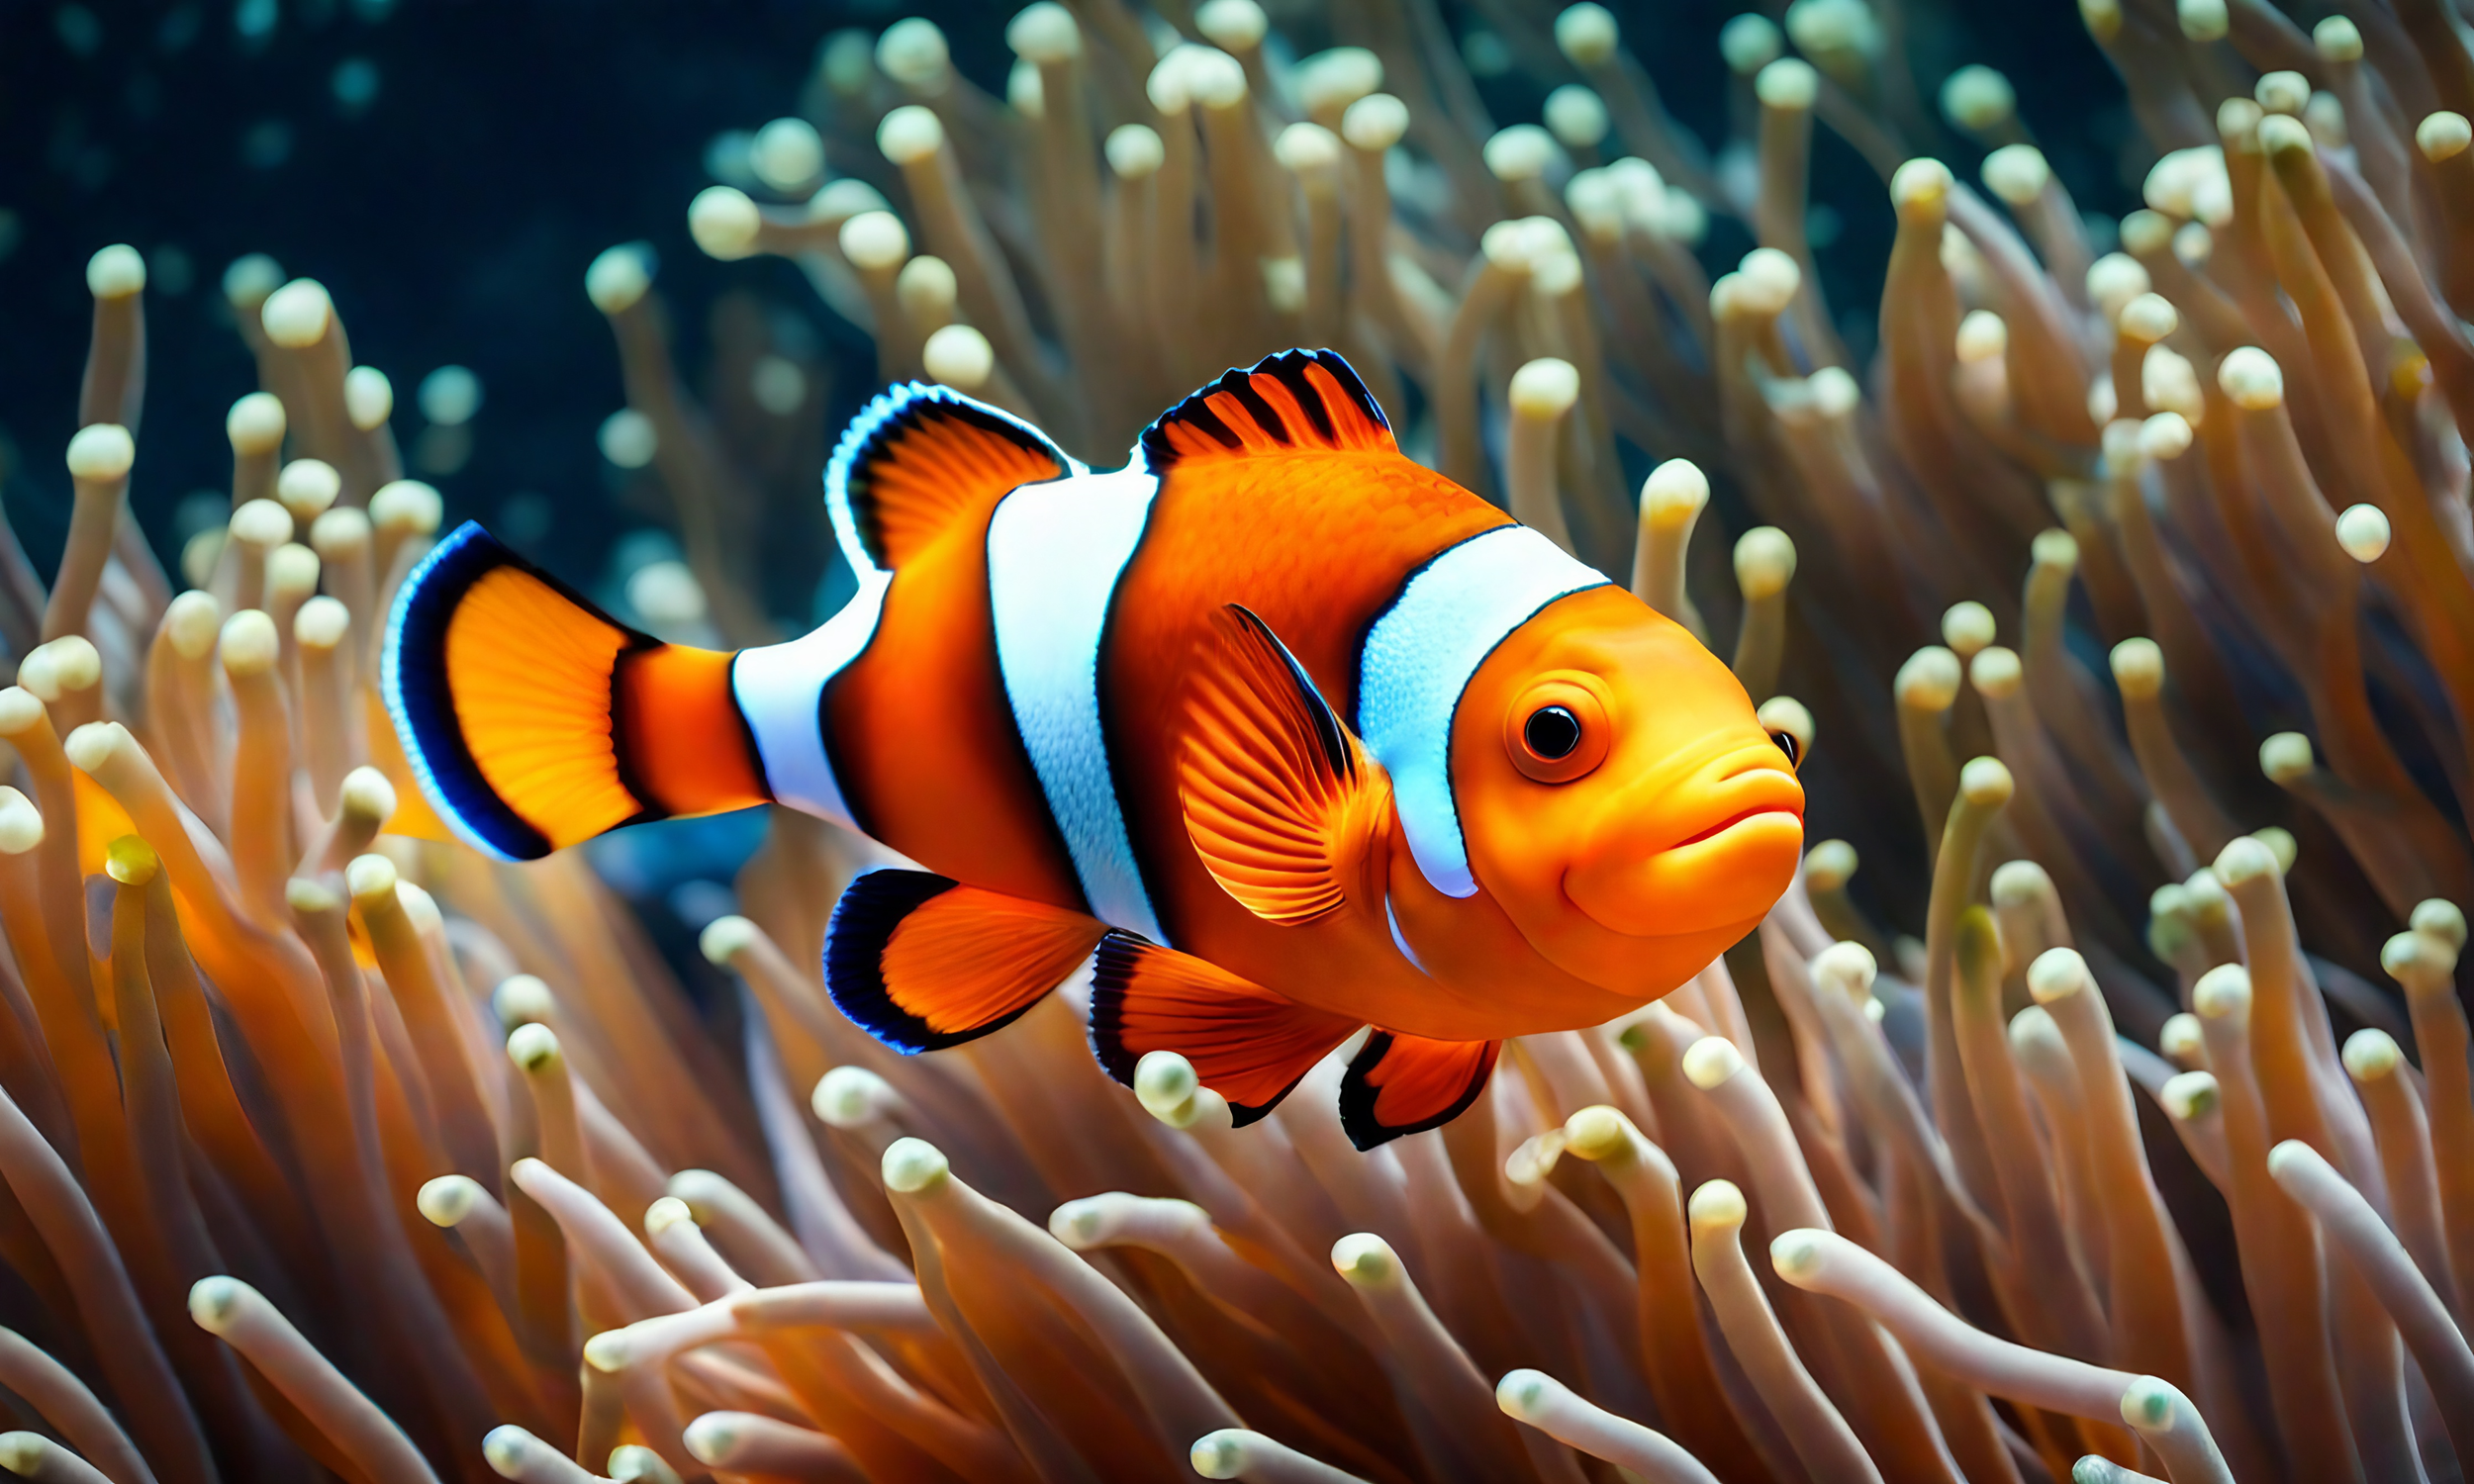 generated image of a clown fish in high detail using Stable Diffusion